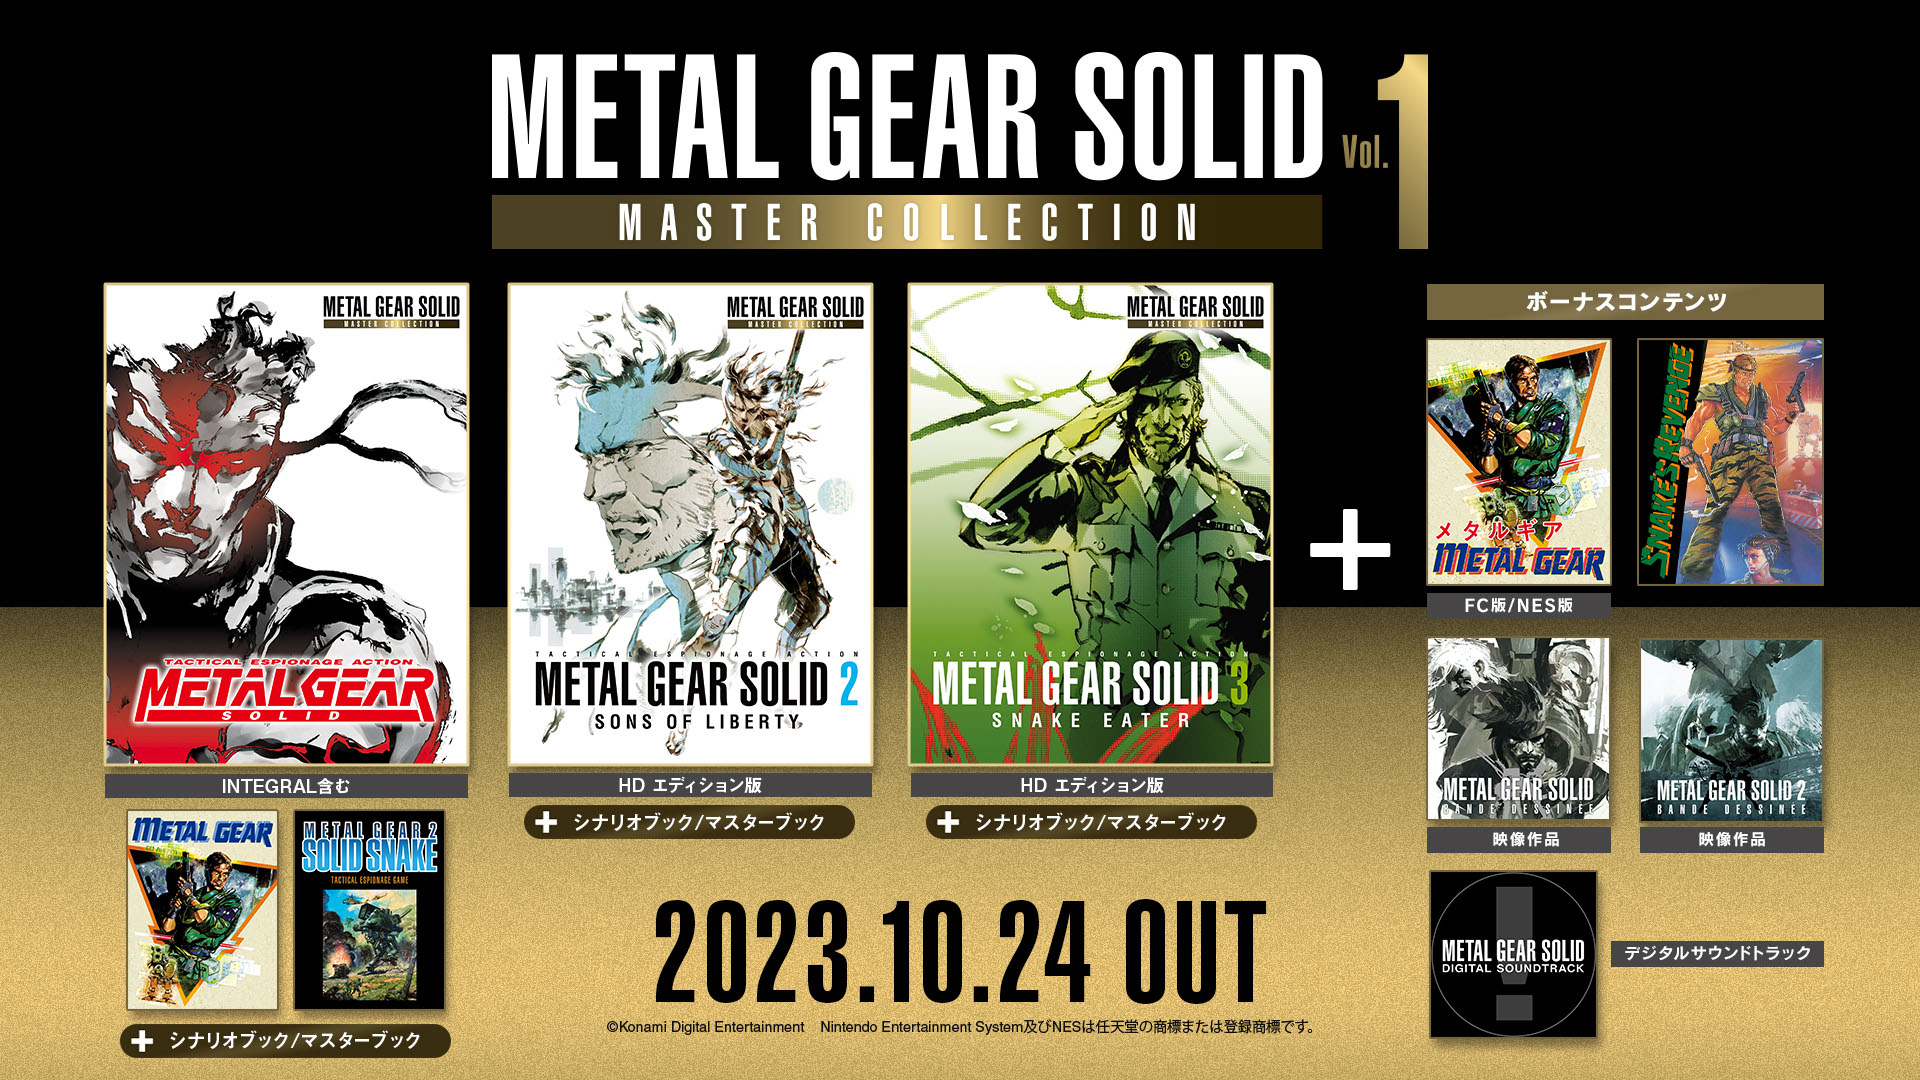 METAL GEAR SOLID: MASTER COLLECTION Vol.1』本日発売！ シリーズ7 